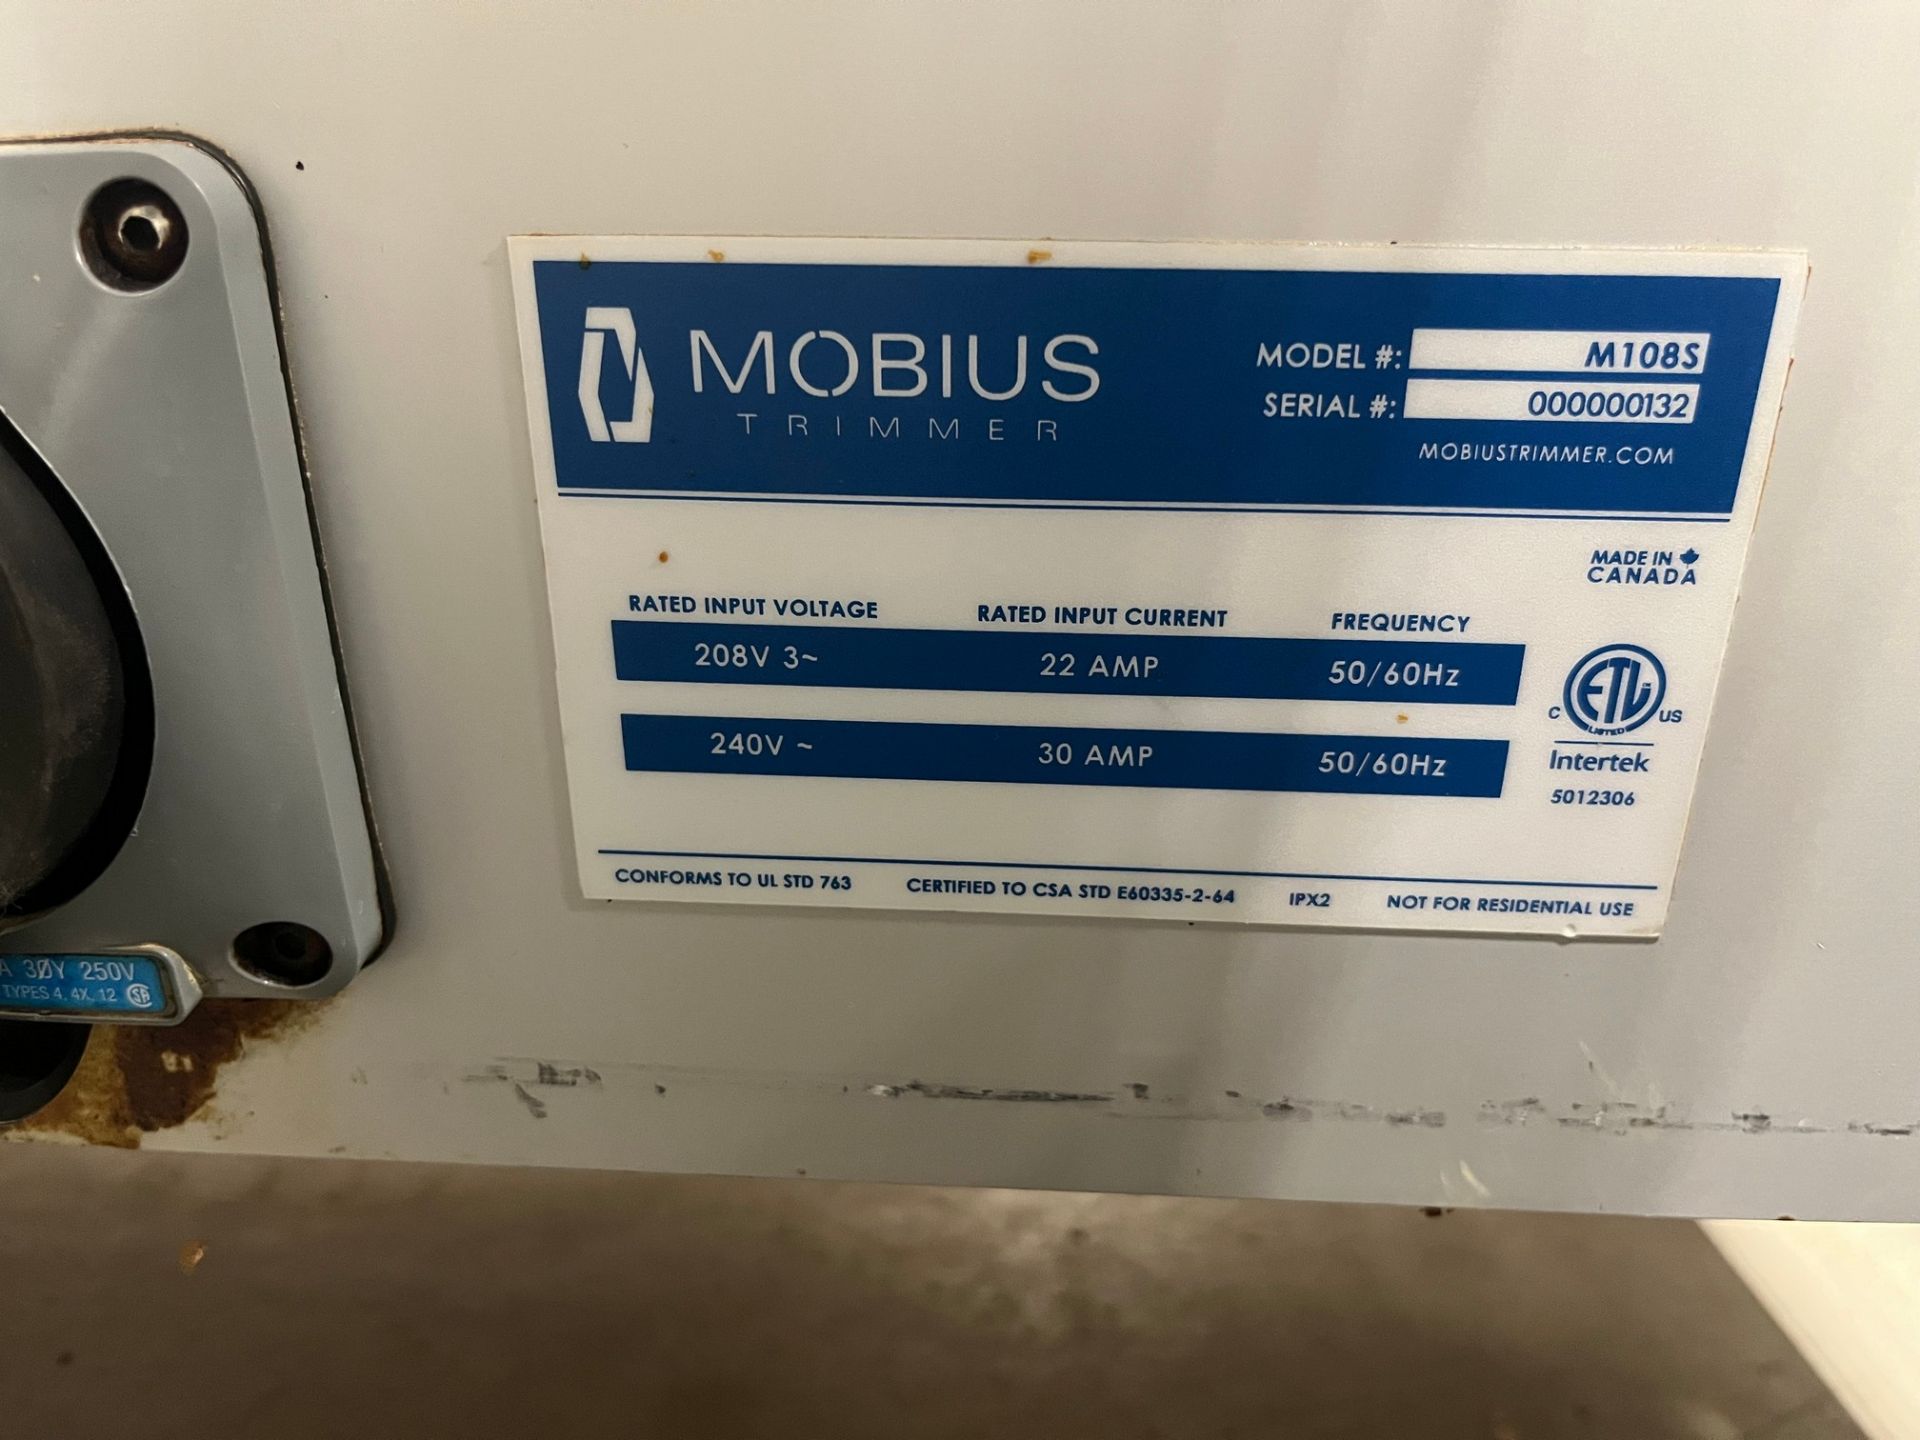 MOBIUS M108S COMMERCIAL CANNABIS TRIMMING MACHINE, S/N 000000132 (MISSING (1) TUMBLER, RUBBER SEAL) - Image 3 of 3